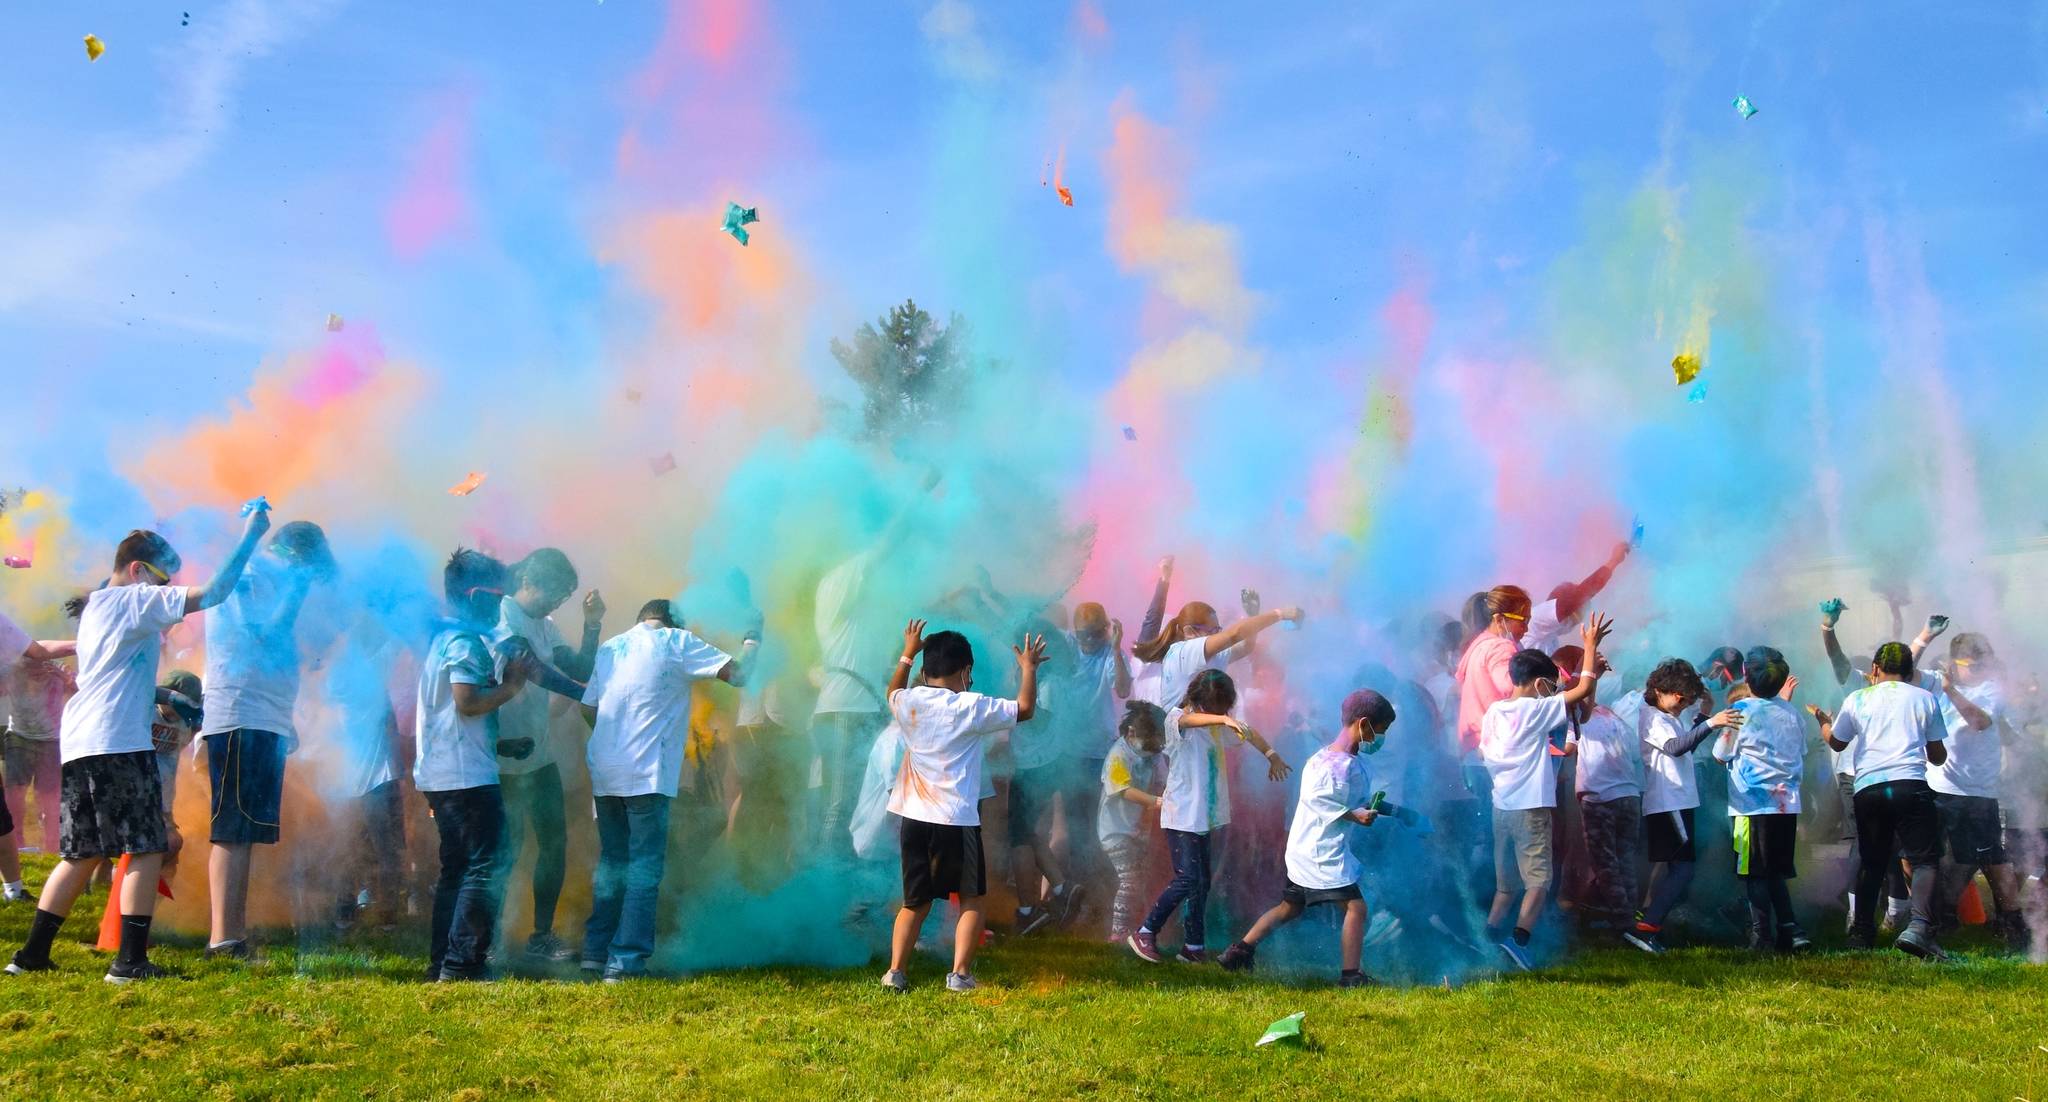 Participants in the 2.5-mile run powder each other with playful hues at a color-throwing station at the Buena Vista Seventh-day Adventist School in Auburn on Sunday. RACHEL CIAMPI, Auburn Reporter